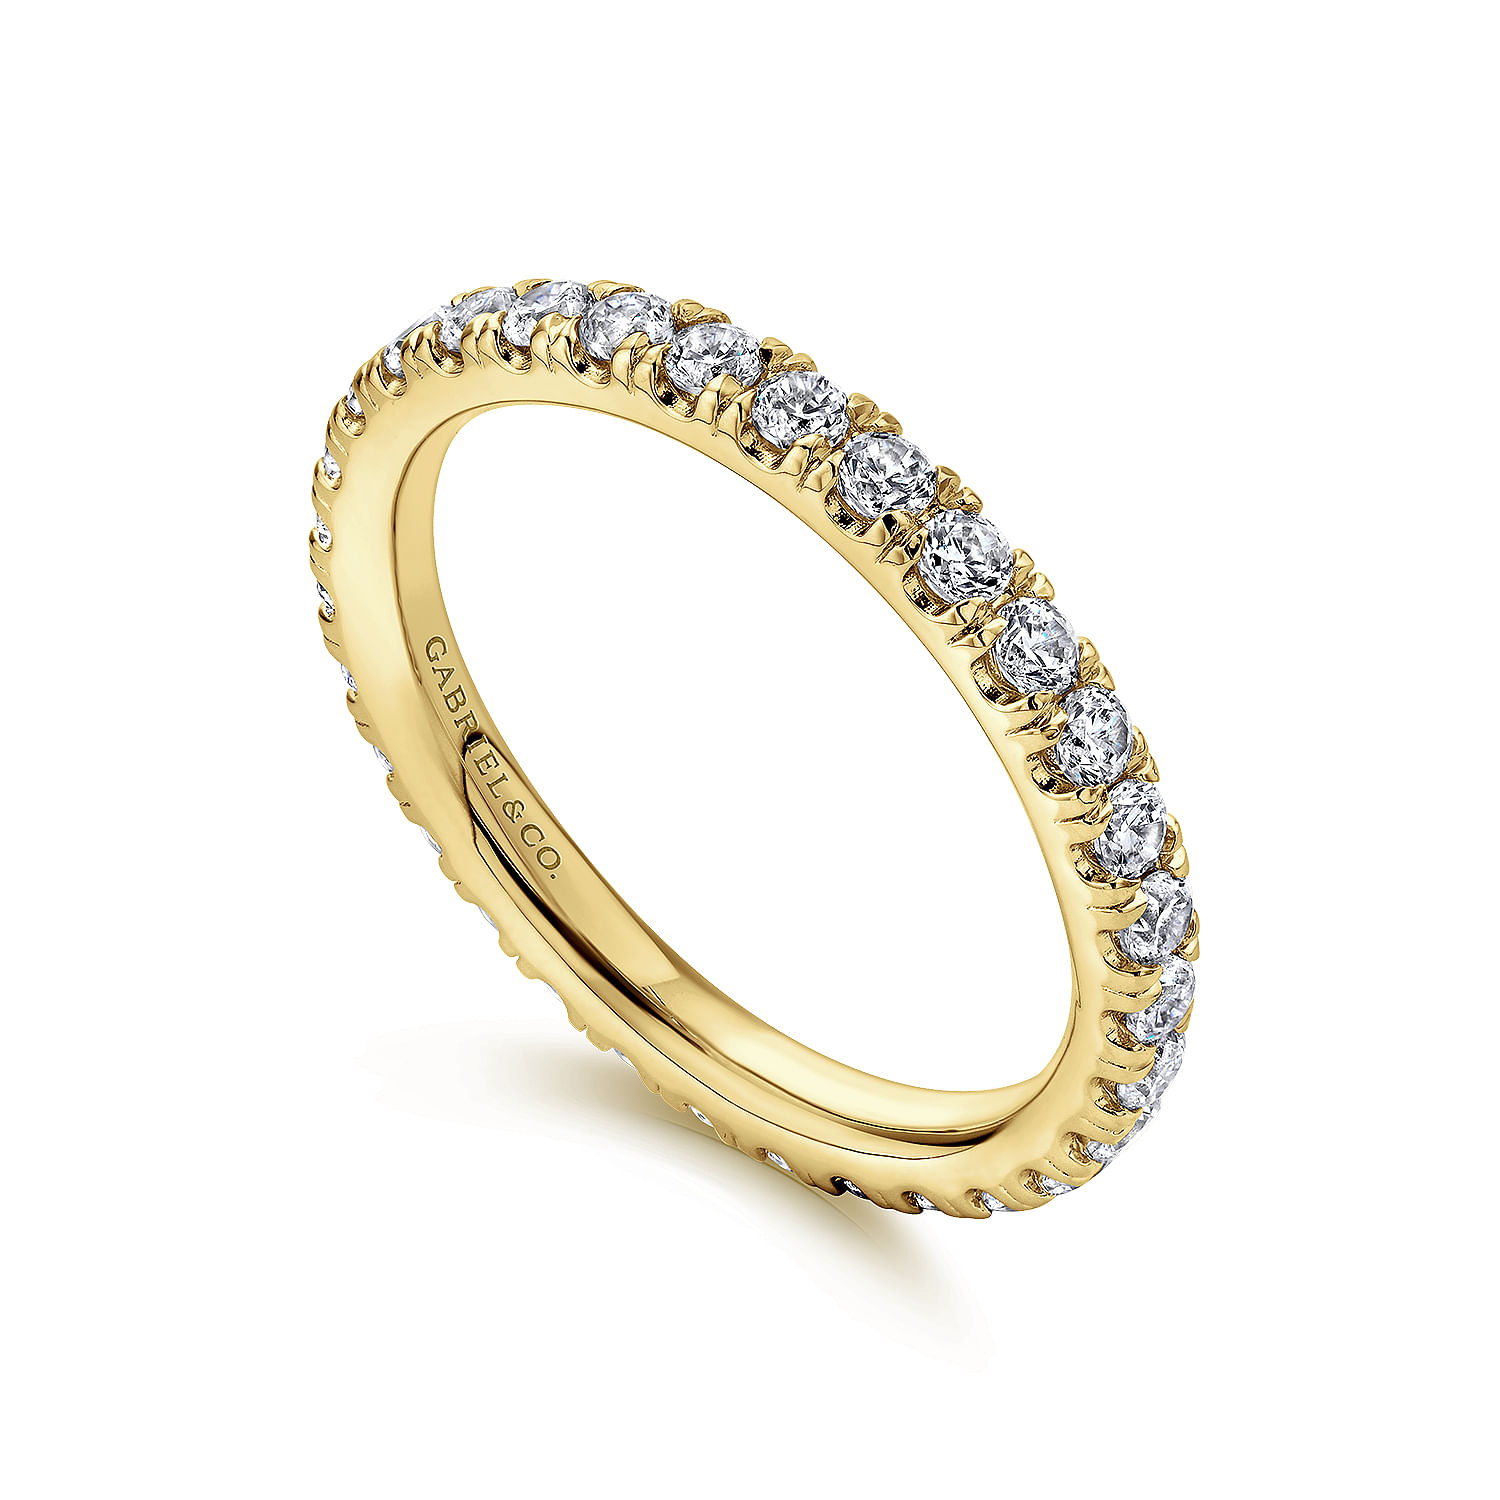 Avignon - French Pave  Eternity Diamond Ring in 14K Yellow Gold - 1.05 ct - Shot 3